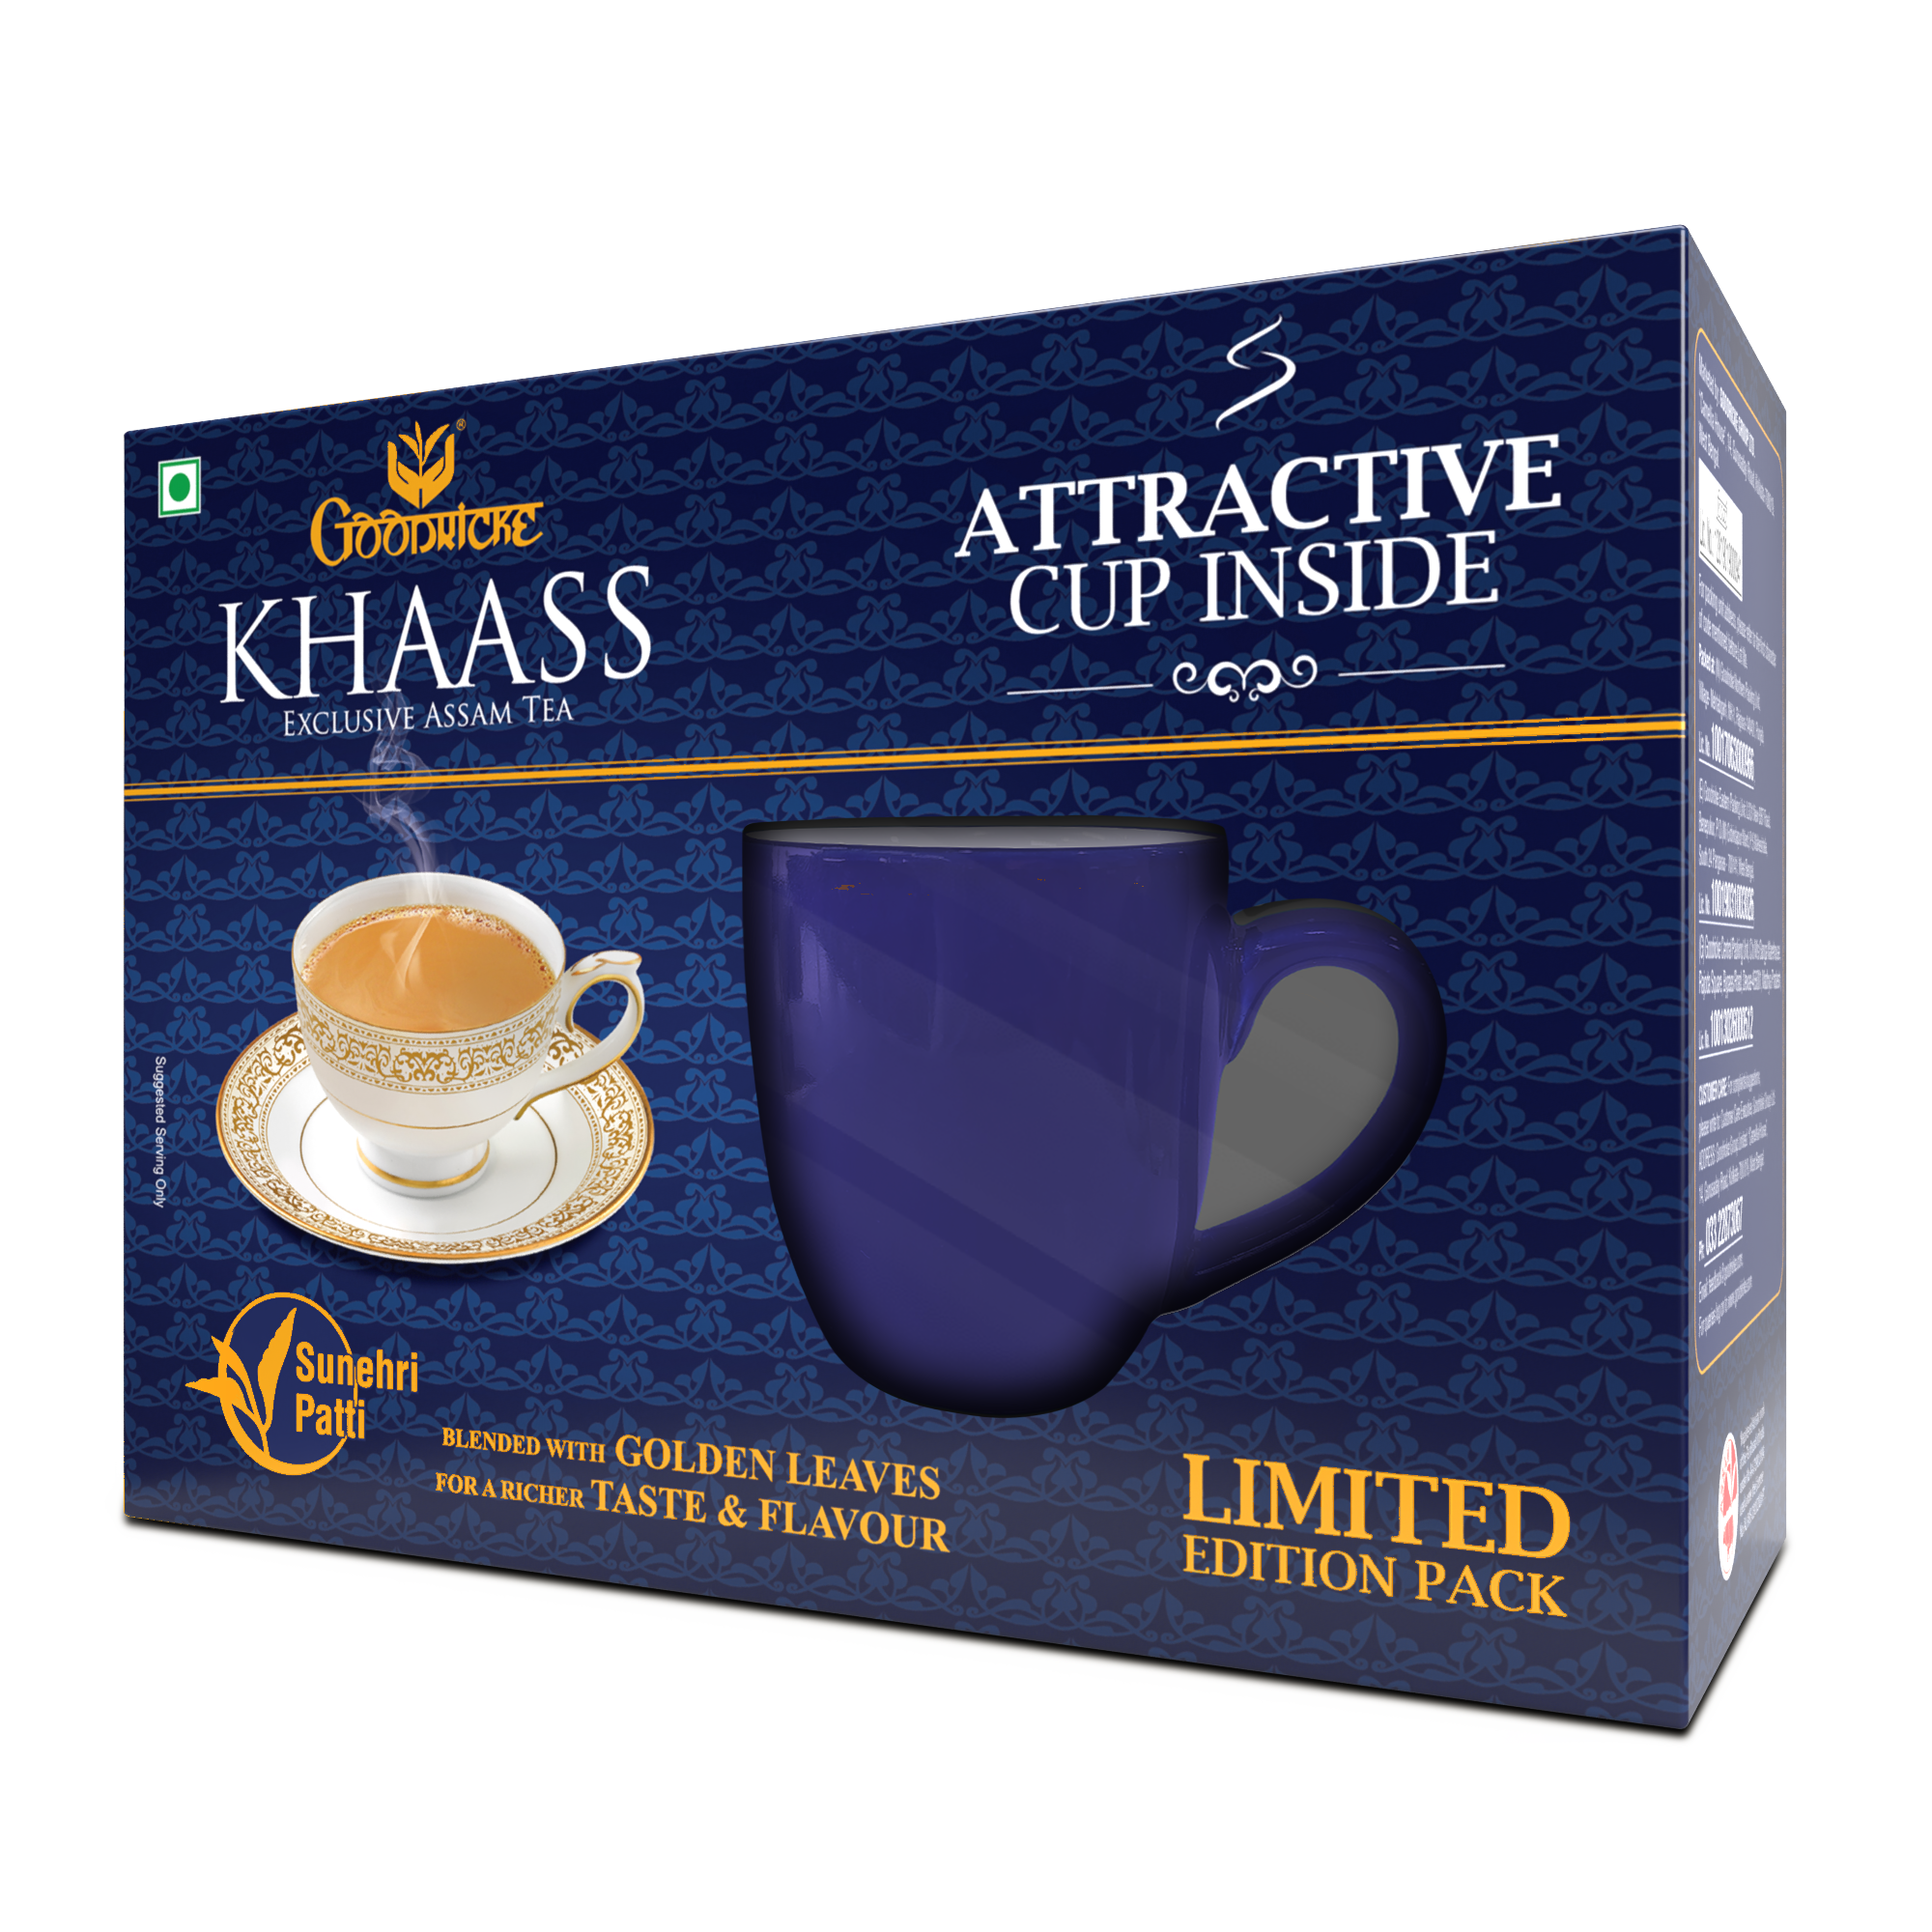 Goodricke Khaass Exclusive Assam Tea - 250 gms- Pack of 1 (Free Cup)- Limited Edition Pack